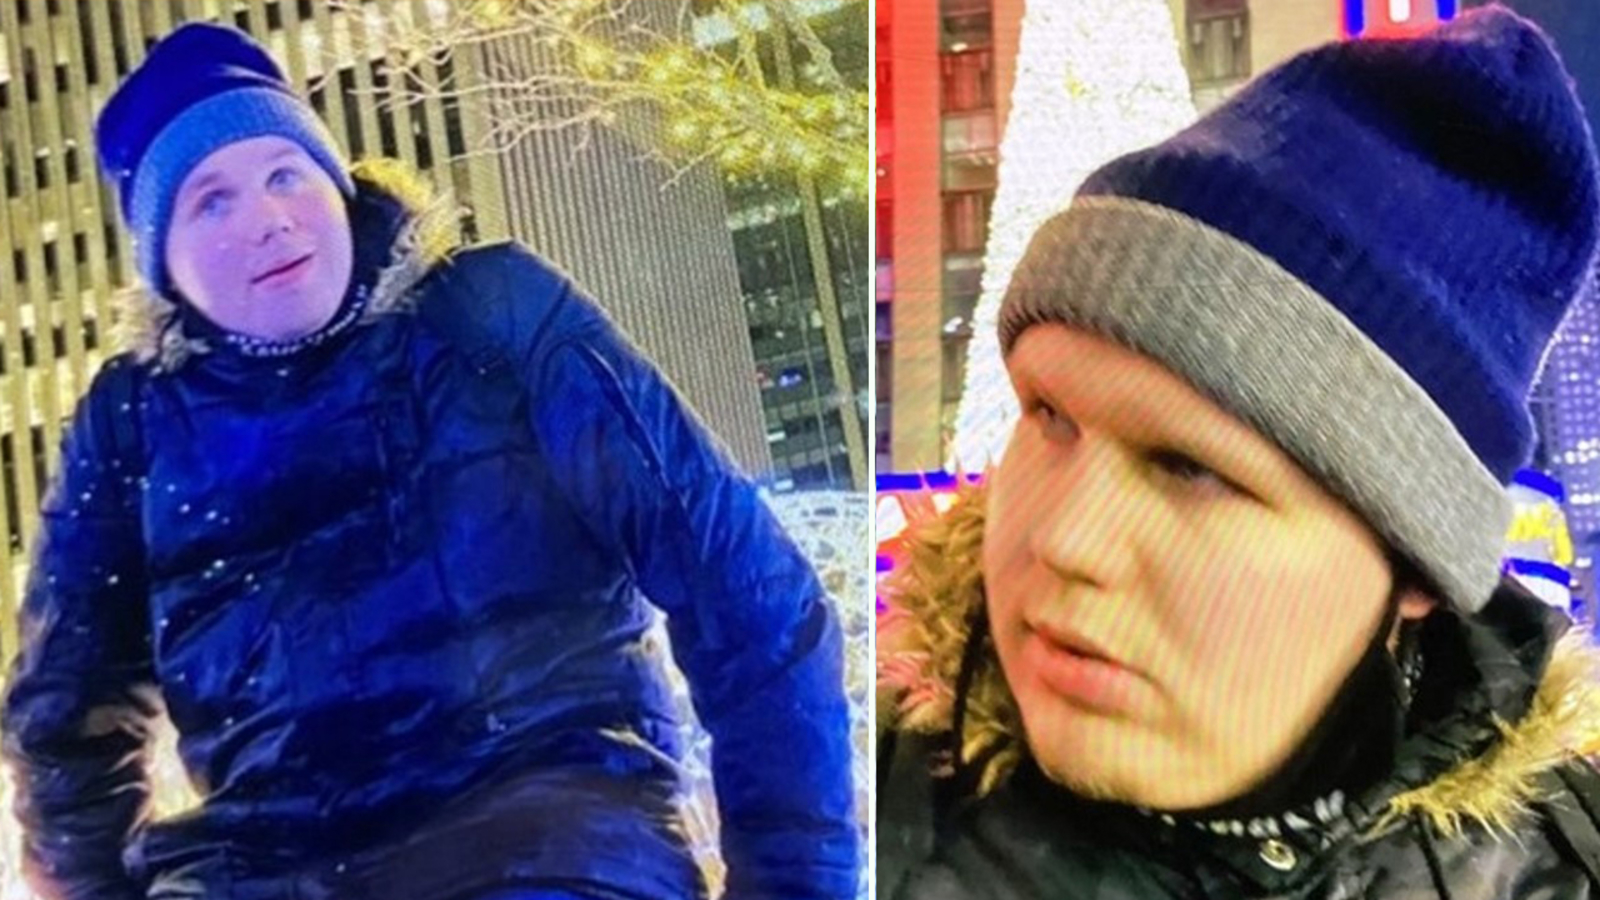 Nonverbal 20-year-old from Queens missing, last seen in Midtown, Manhattan